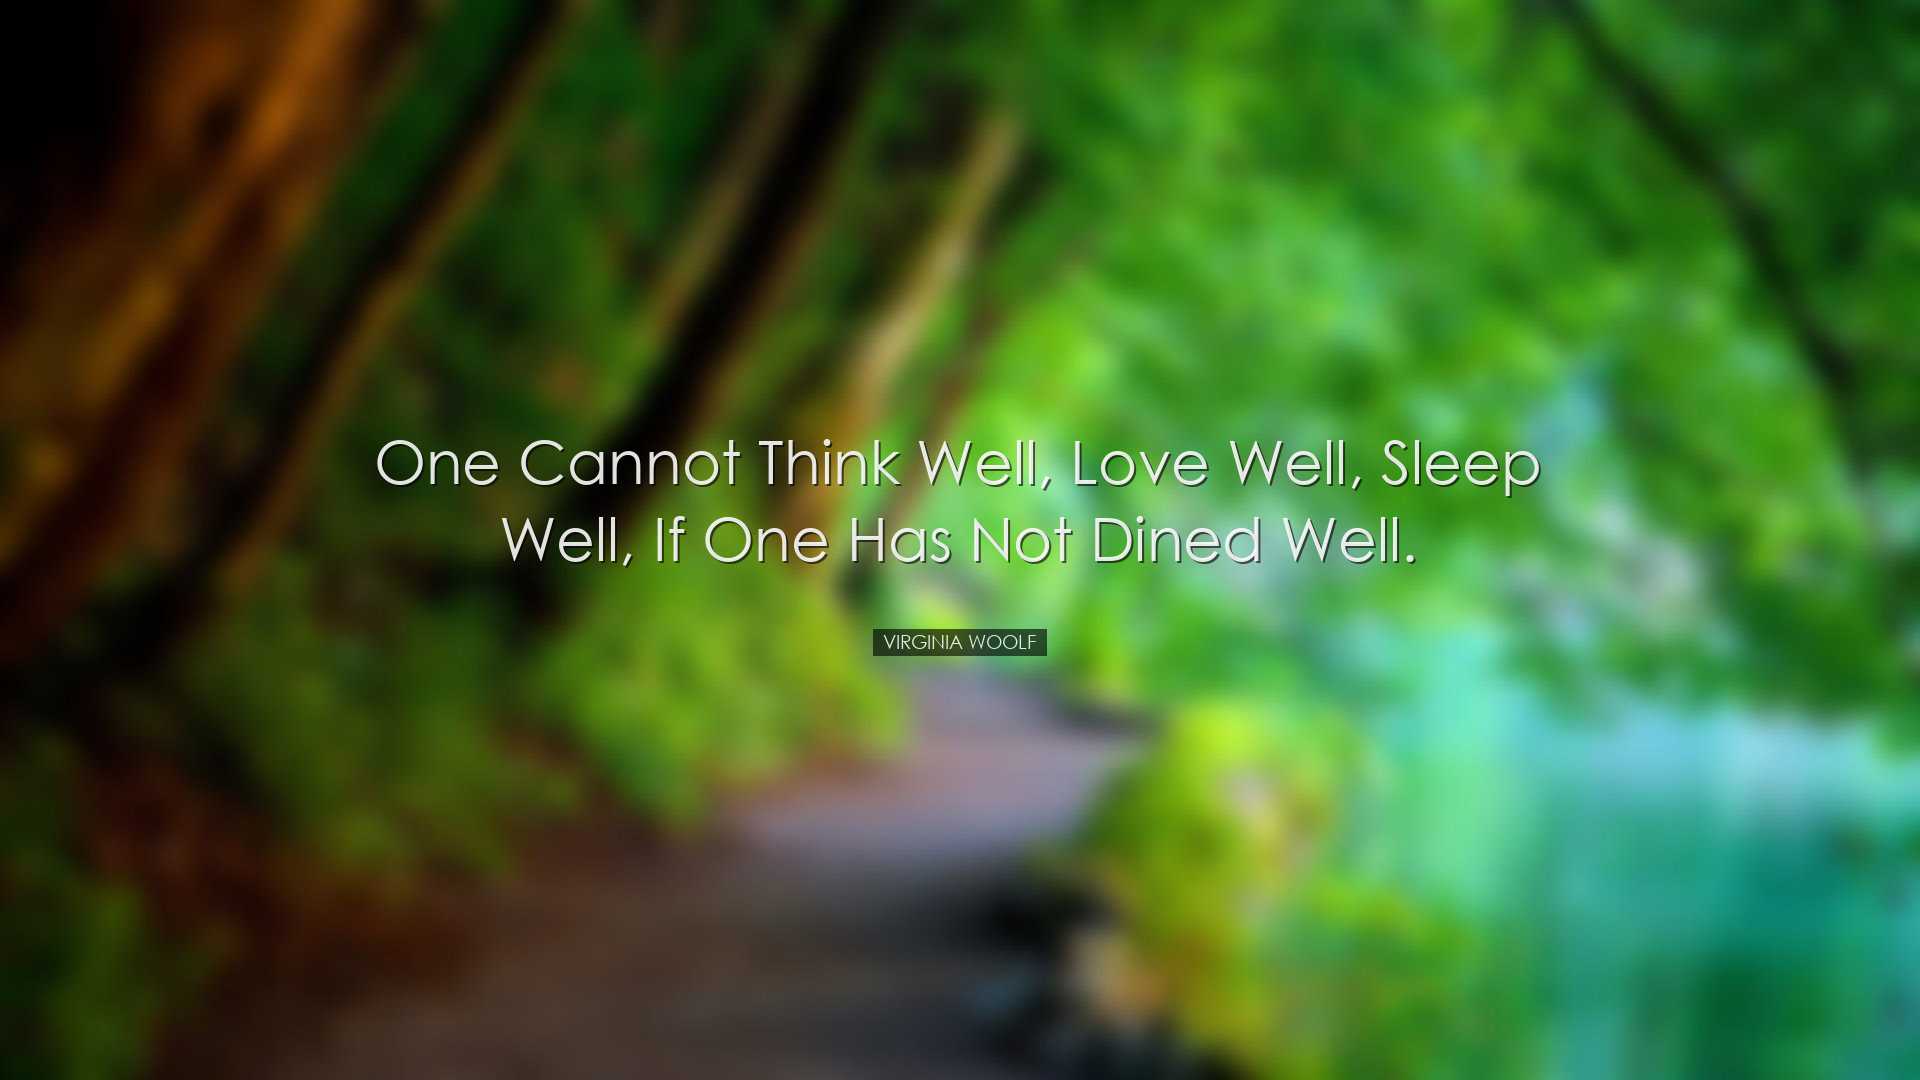 One cannot think well, love well, sleep well, if one has not dined